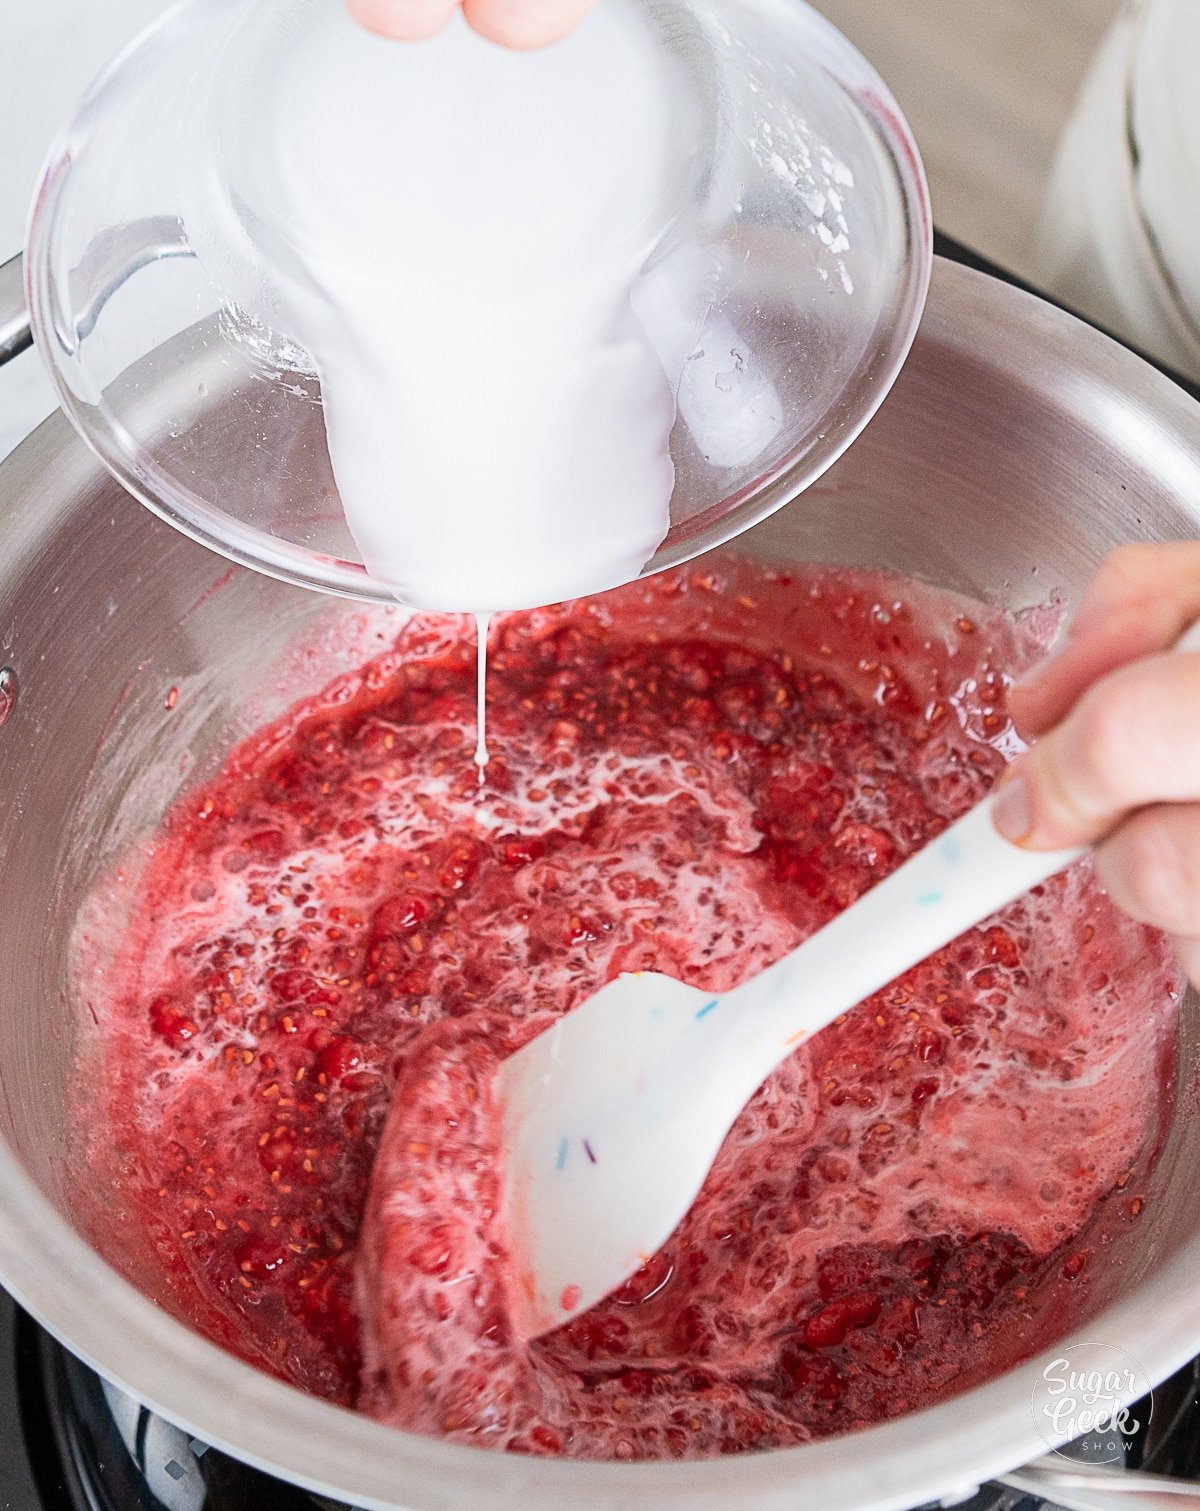 hand pouring cornstarch slurry into cooked raspberries in a pot while stirring.